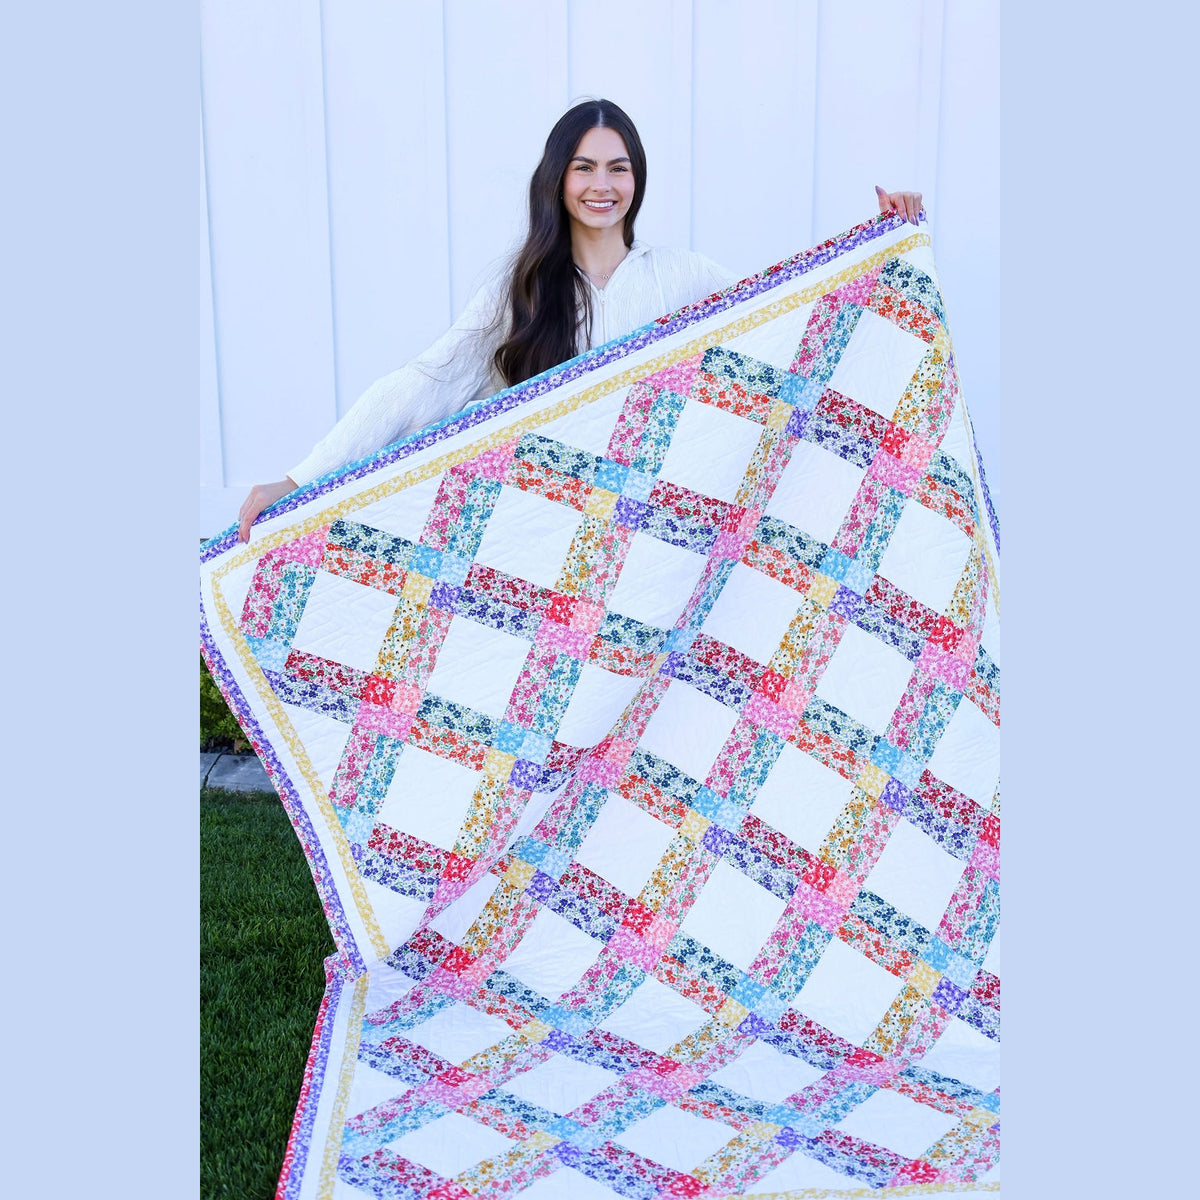 Morning Glory Quilt Kit Fabric Pattern, Binding, And backing Included ALL PRE CUT Throw Quilt Kit 63" x 77" Ready to Sew Beginner